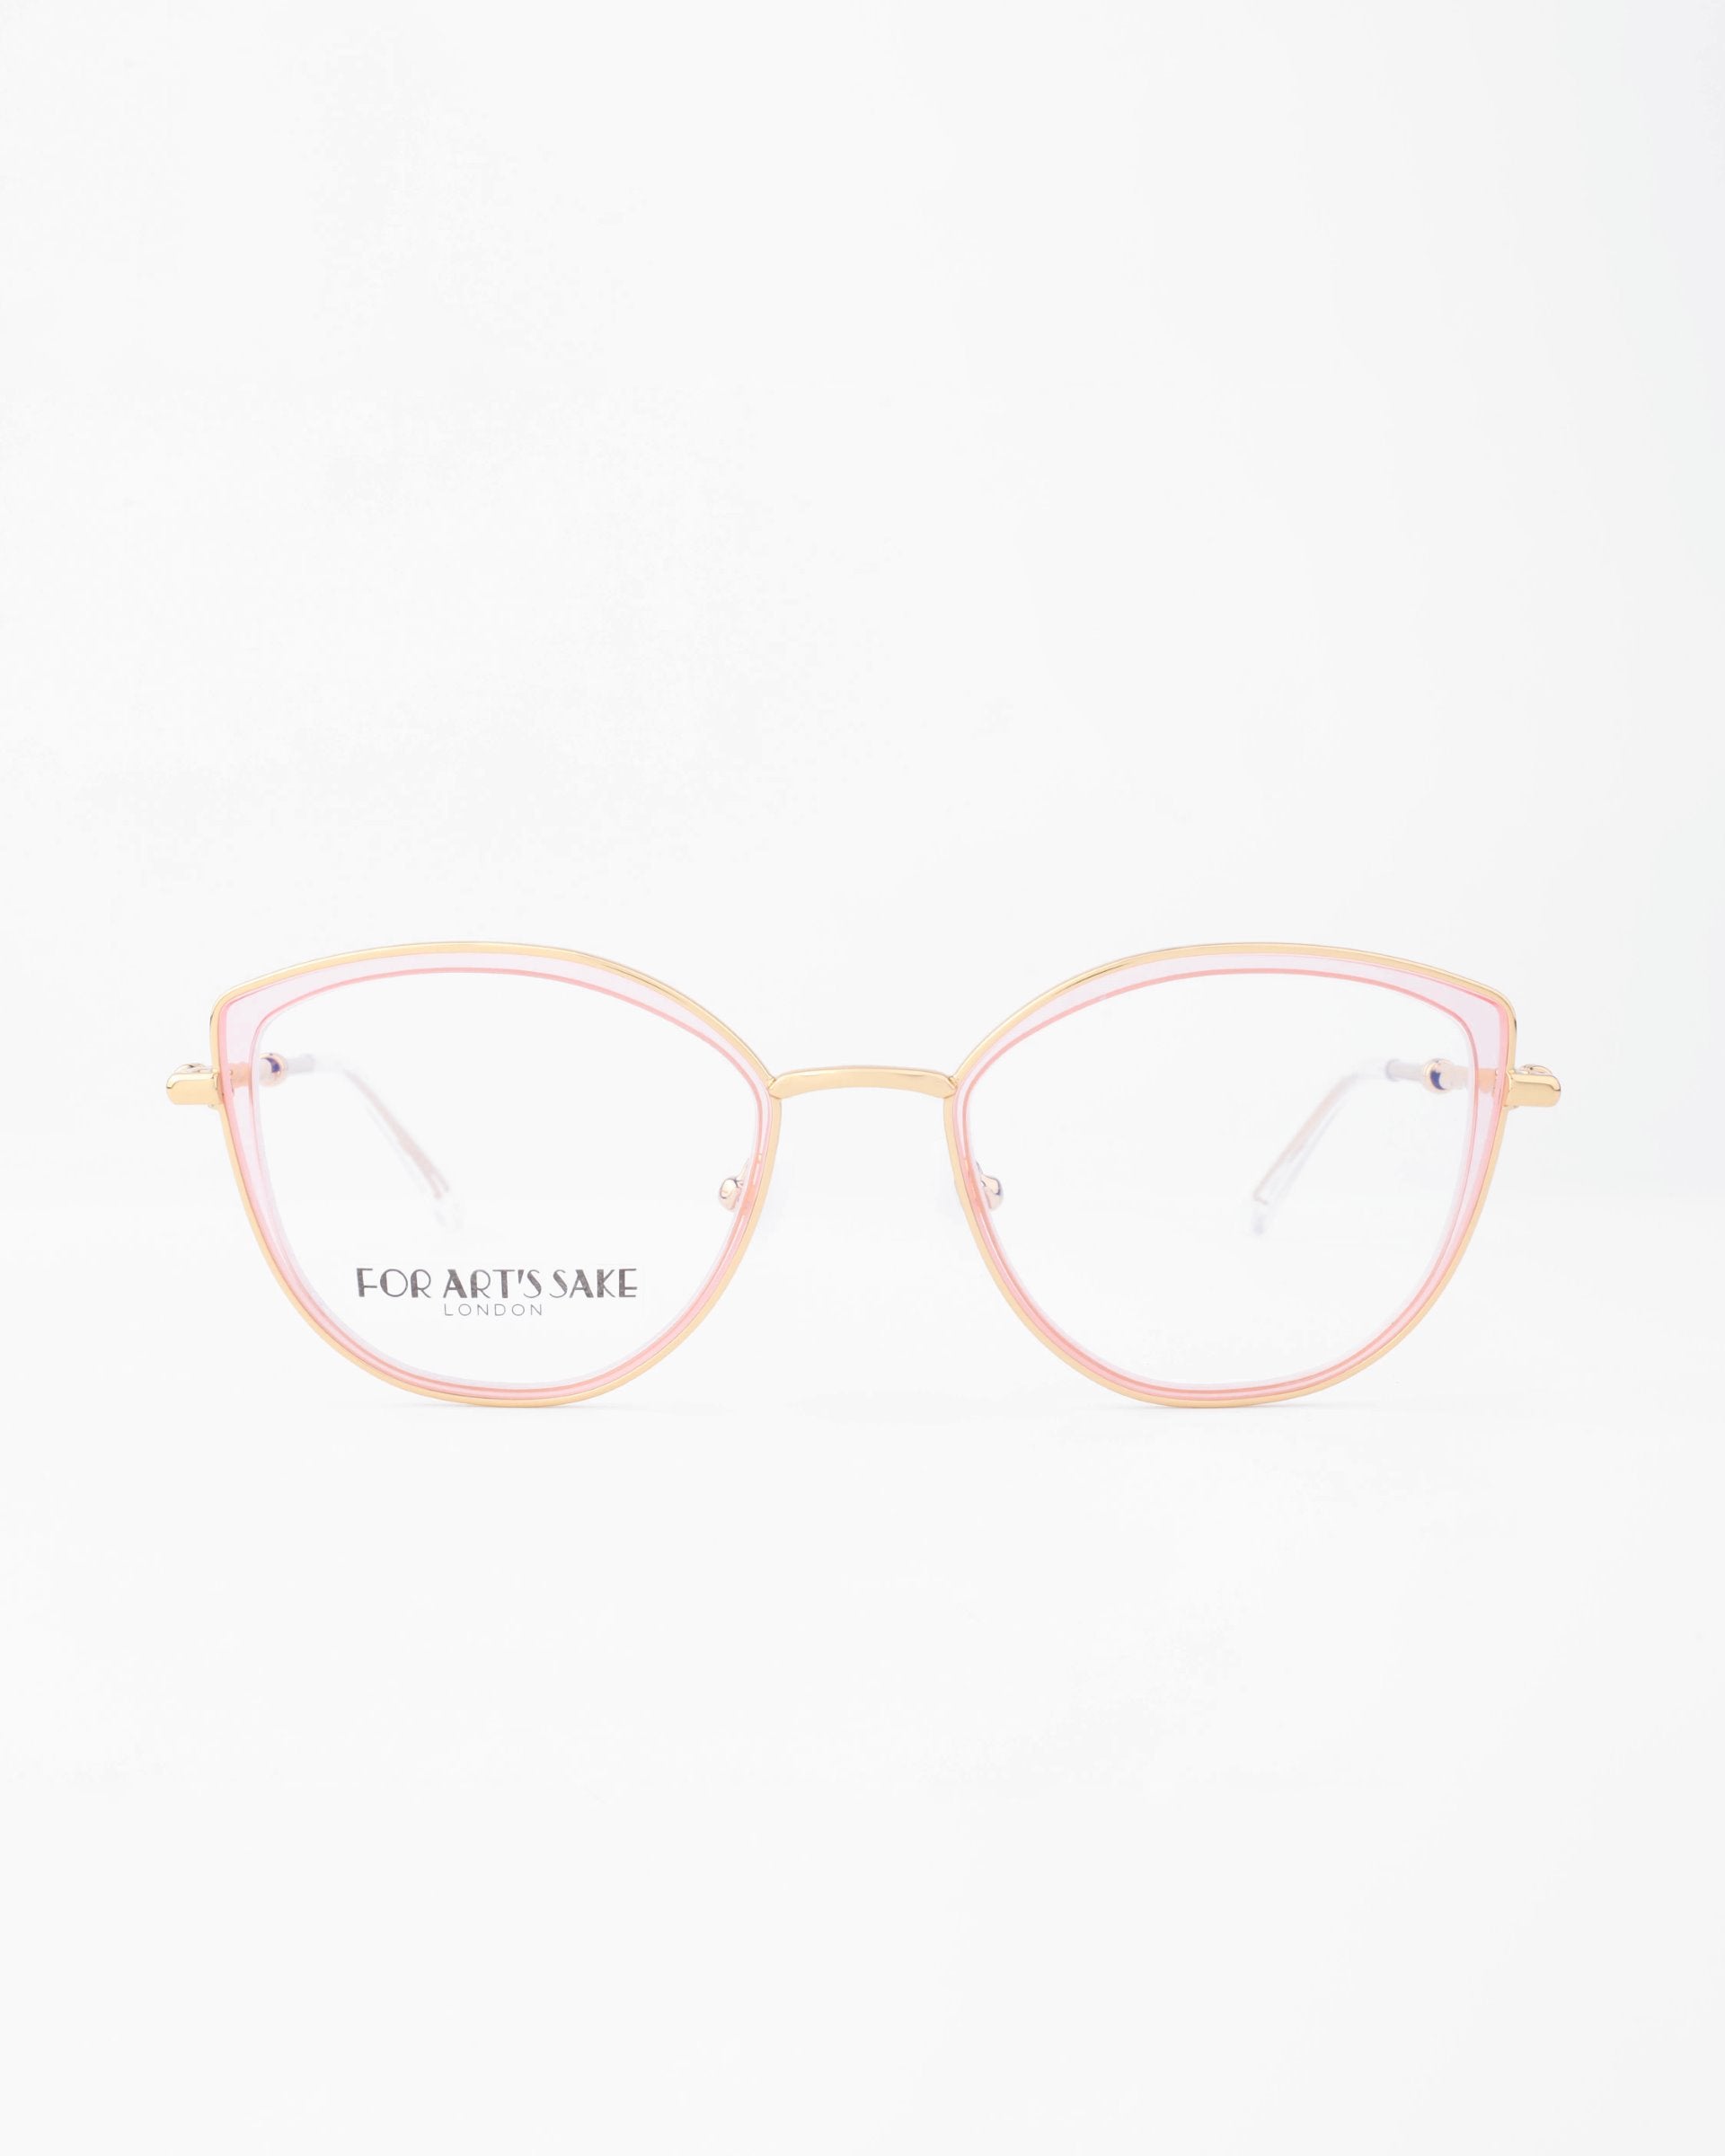 A pair of fashionable eyeglasses with thin, 18-karat gold-plated frames and light pink accents around the lenses. The left lens has &quot;FOR ART&#39;S SAKE®&quot; printed in black on it. These stylish glasses, which come with a blue light filter option, are displayed against a plain white background.